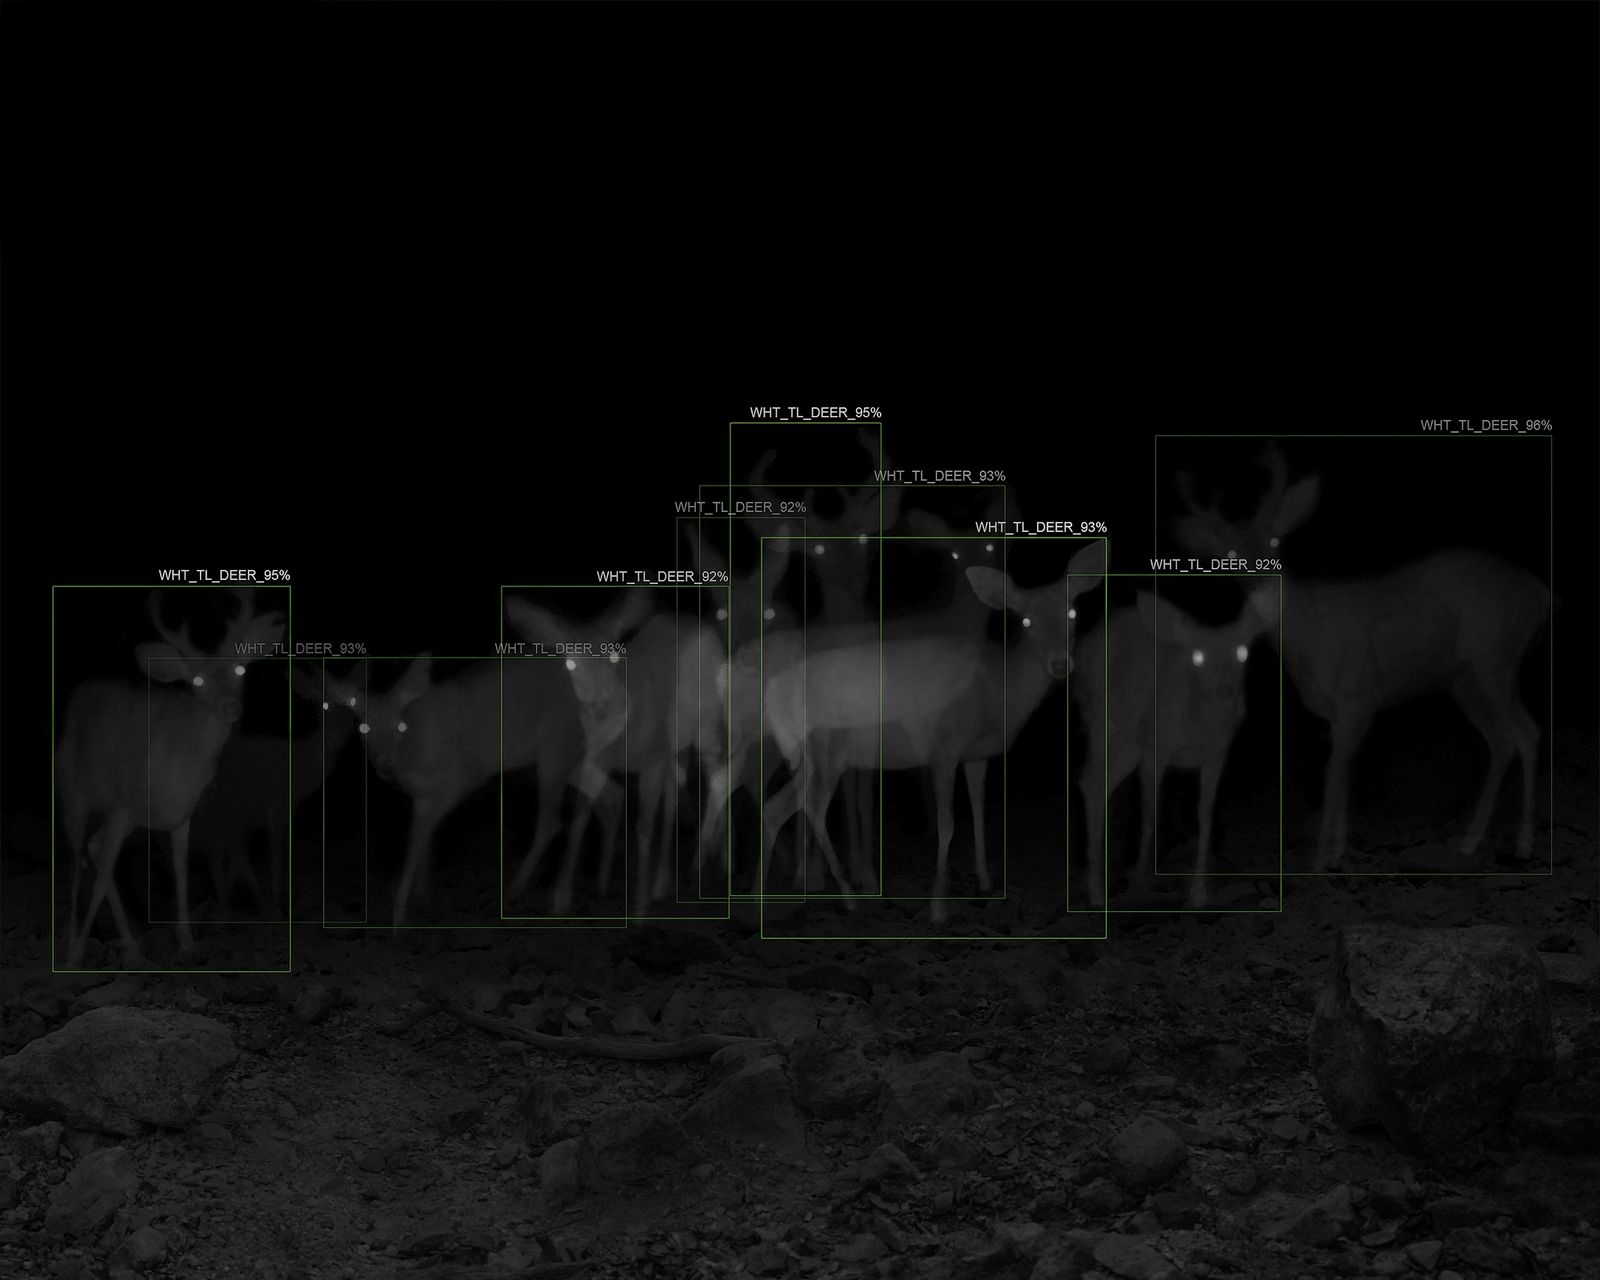 © Alex Turner - 10 White-Tailed Deer with A.I. Recognition, 1-Week Interval, Santa Rita Mountains, AZ